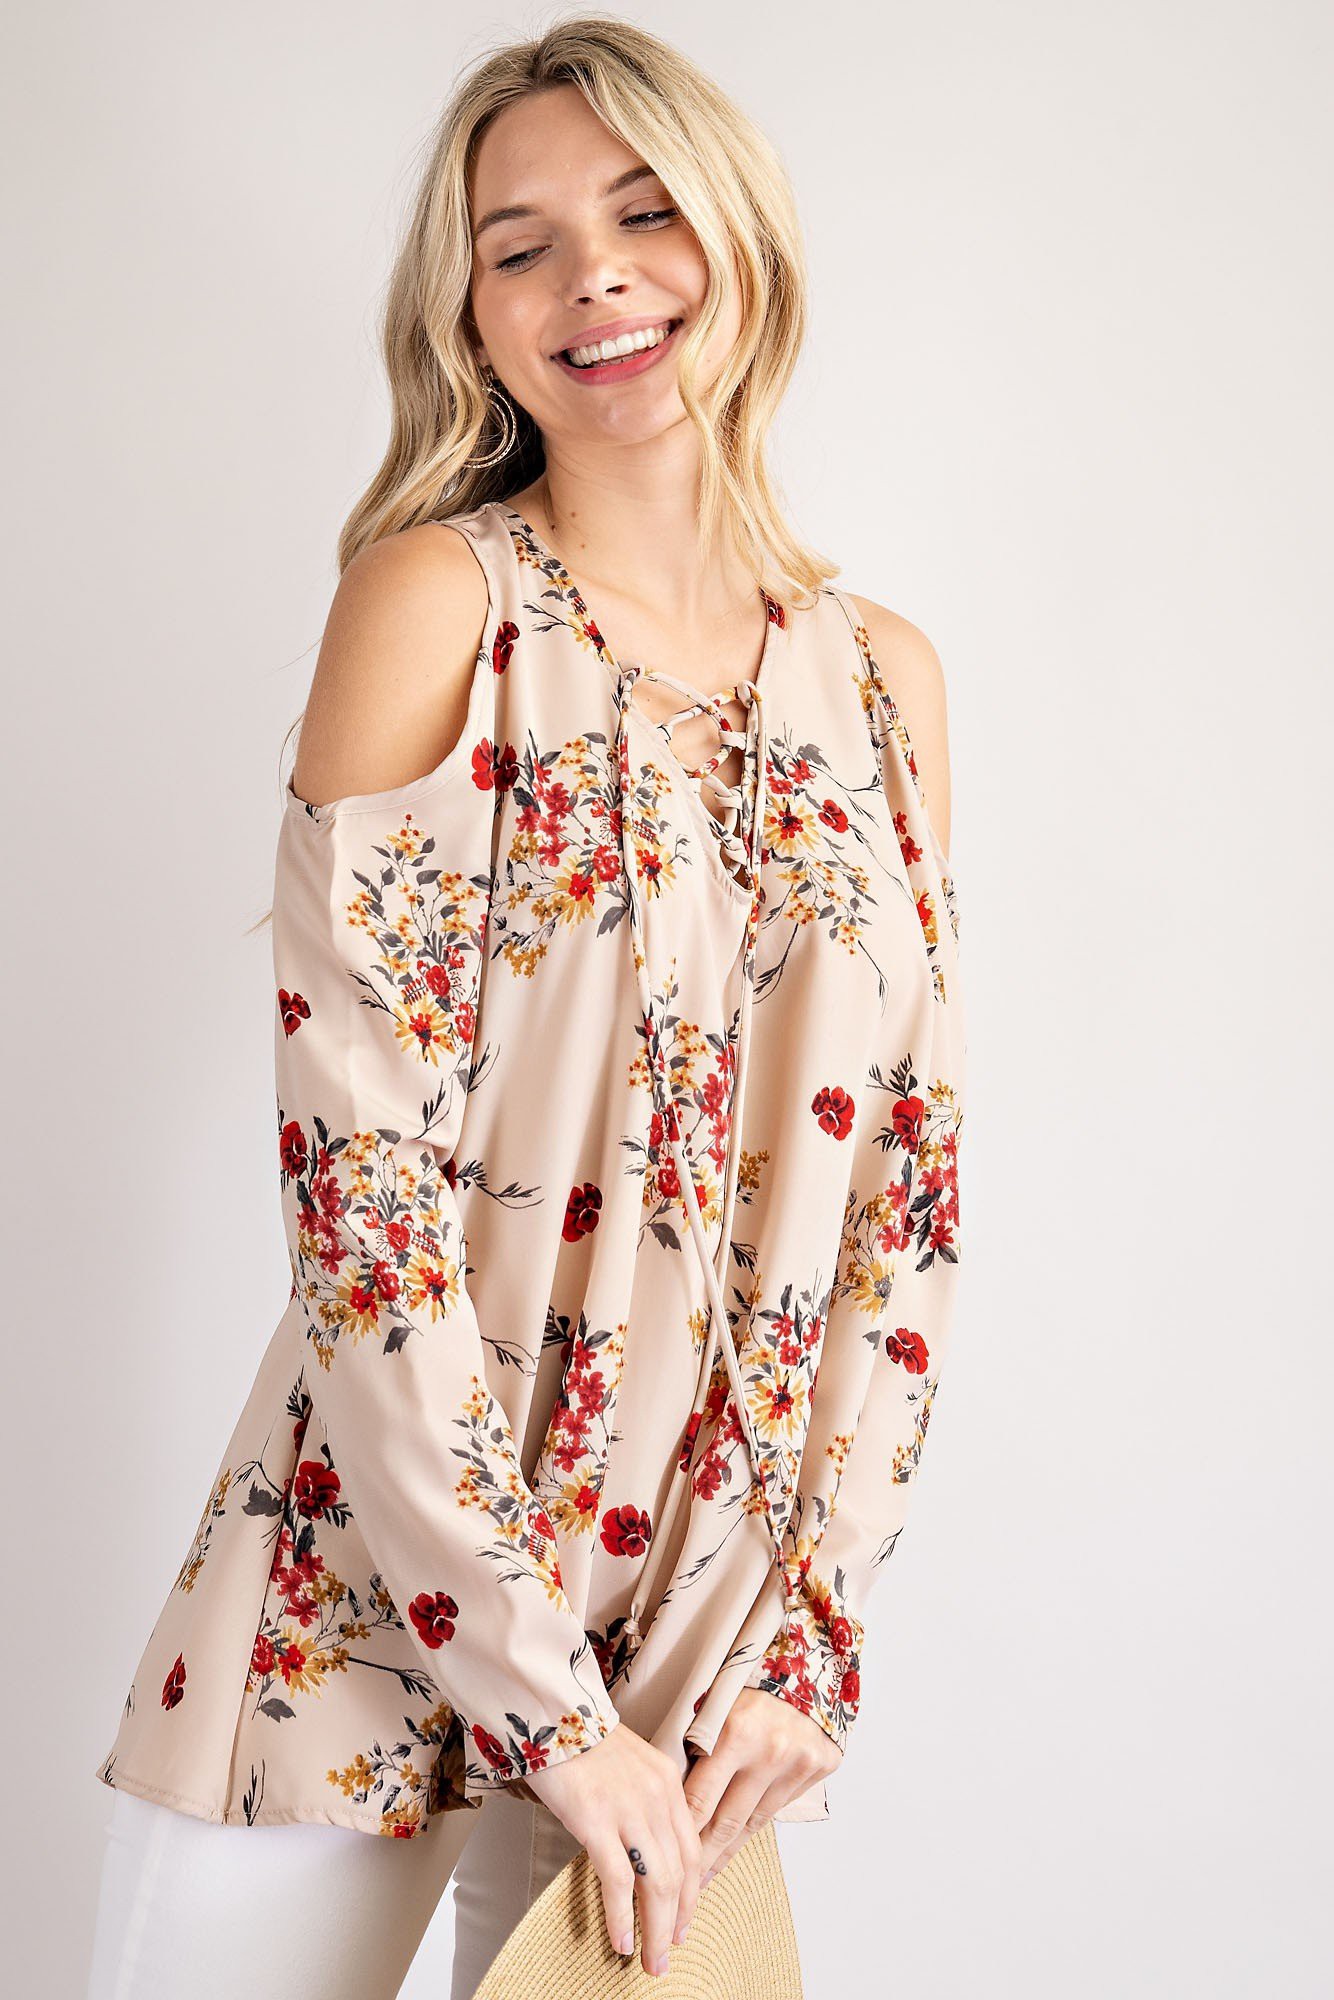 Floral Print
Woven Top
Features a Cold Shoulder
And V-Neckline with Lace-Up
Made in the U.S.A